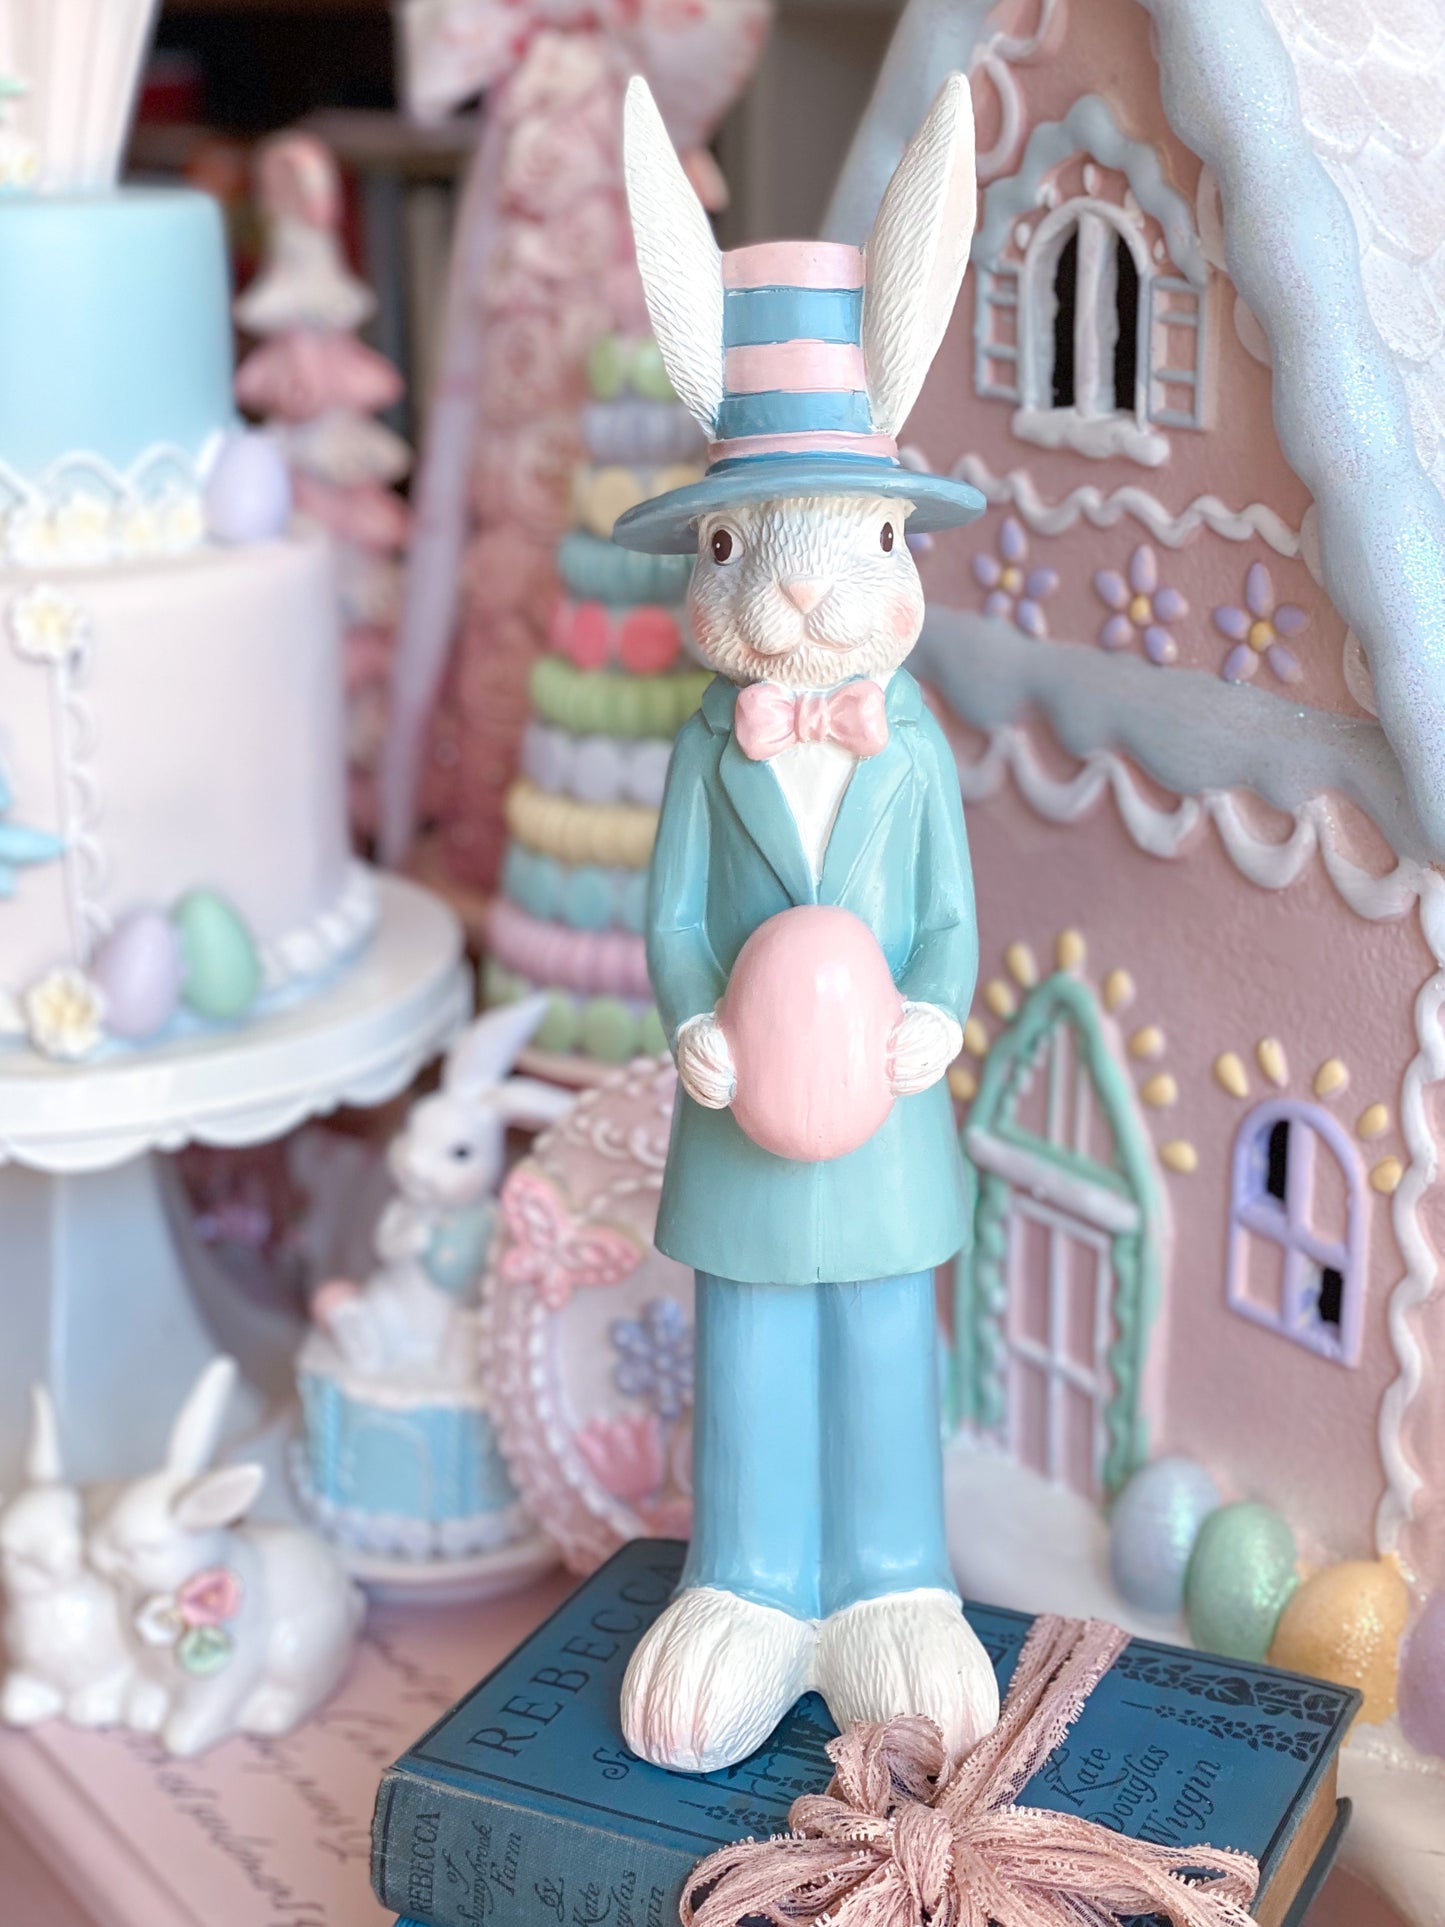 Pastel Pink and Blue Nutcracker Style Bunnies holding Easter eggs